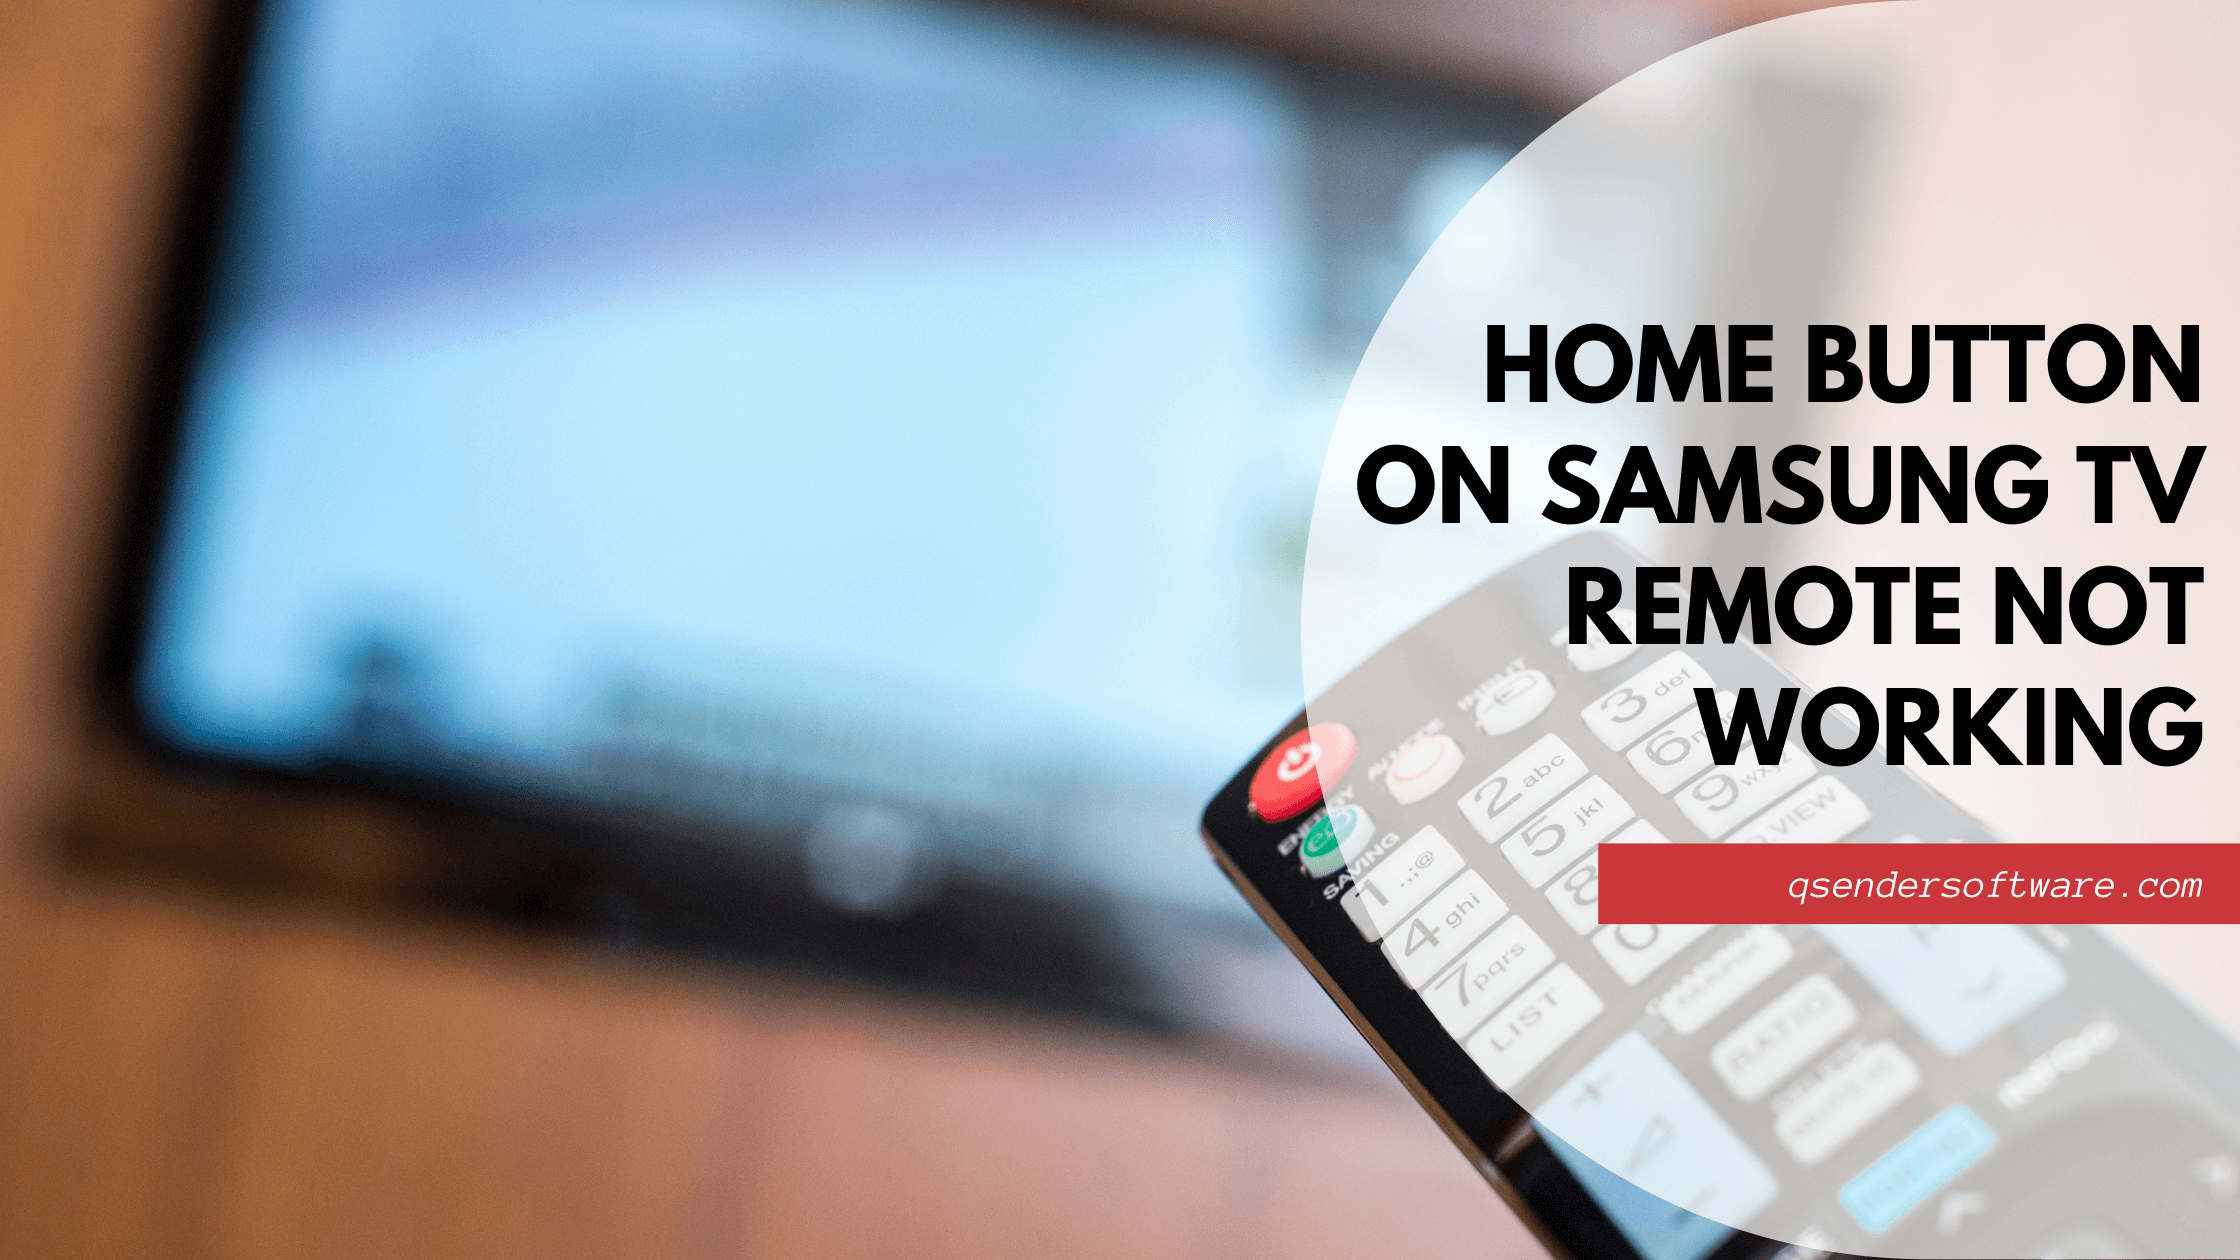 Home button on Samsung tv remote not working